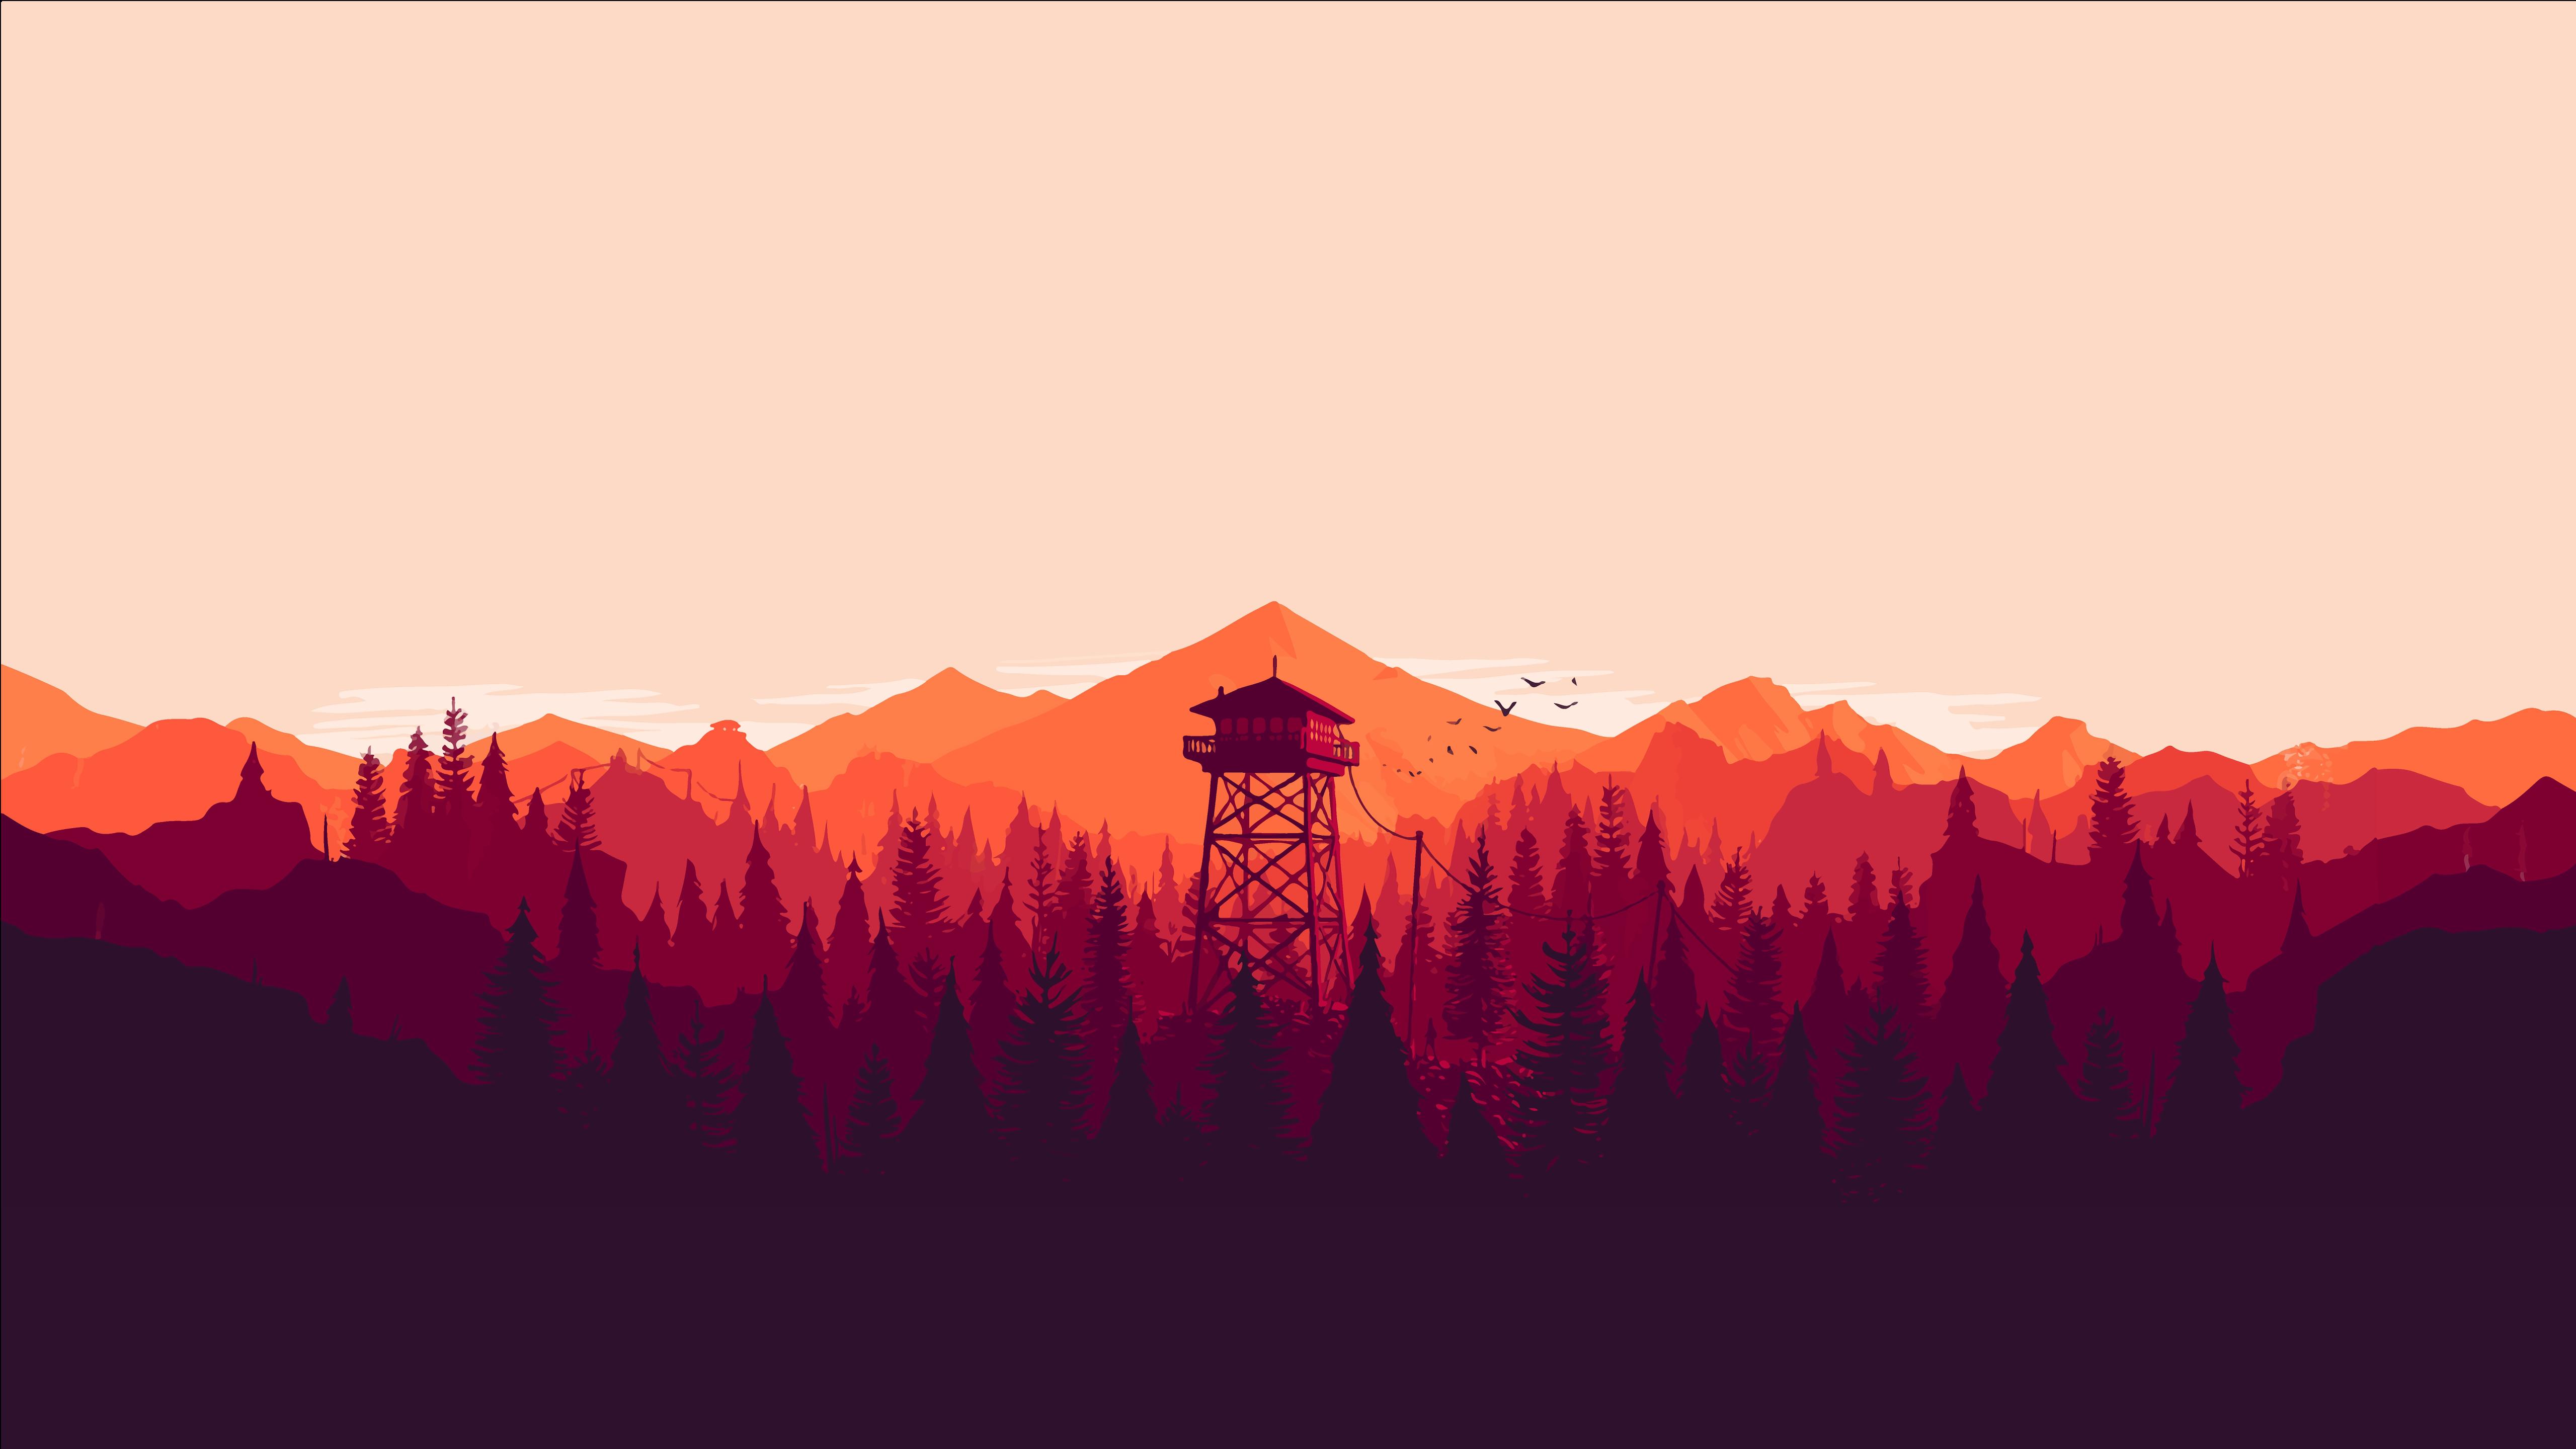 5K resolution (5120x2880) Firewatch Wallpaper Link in comments